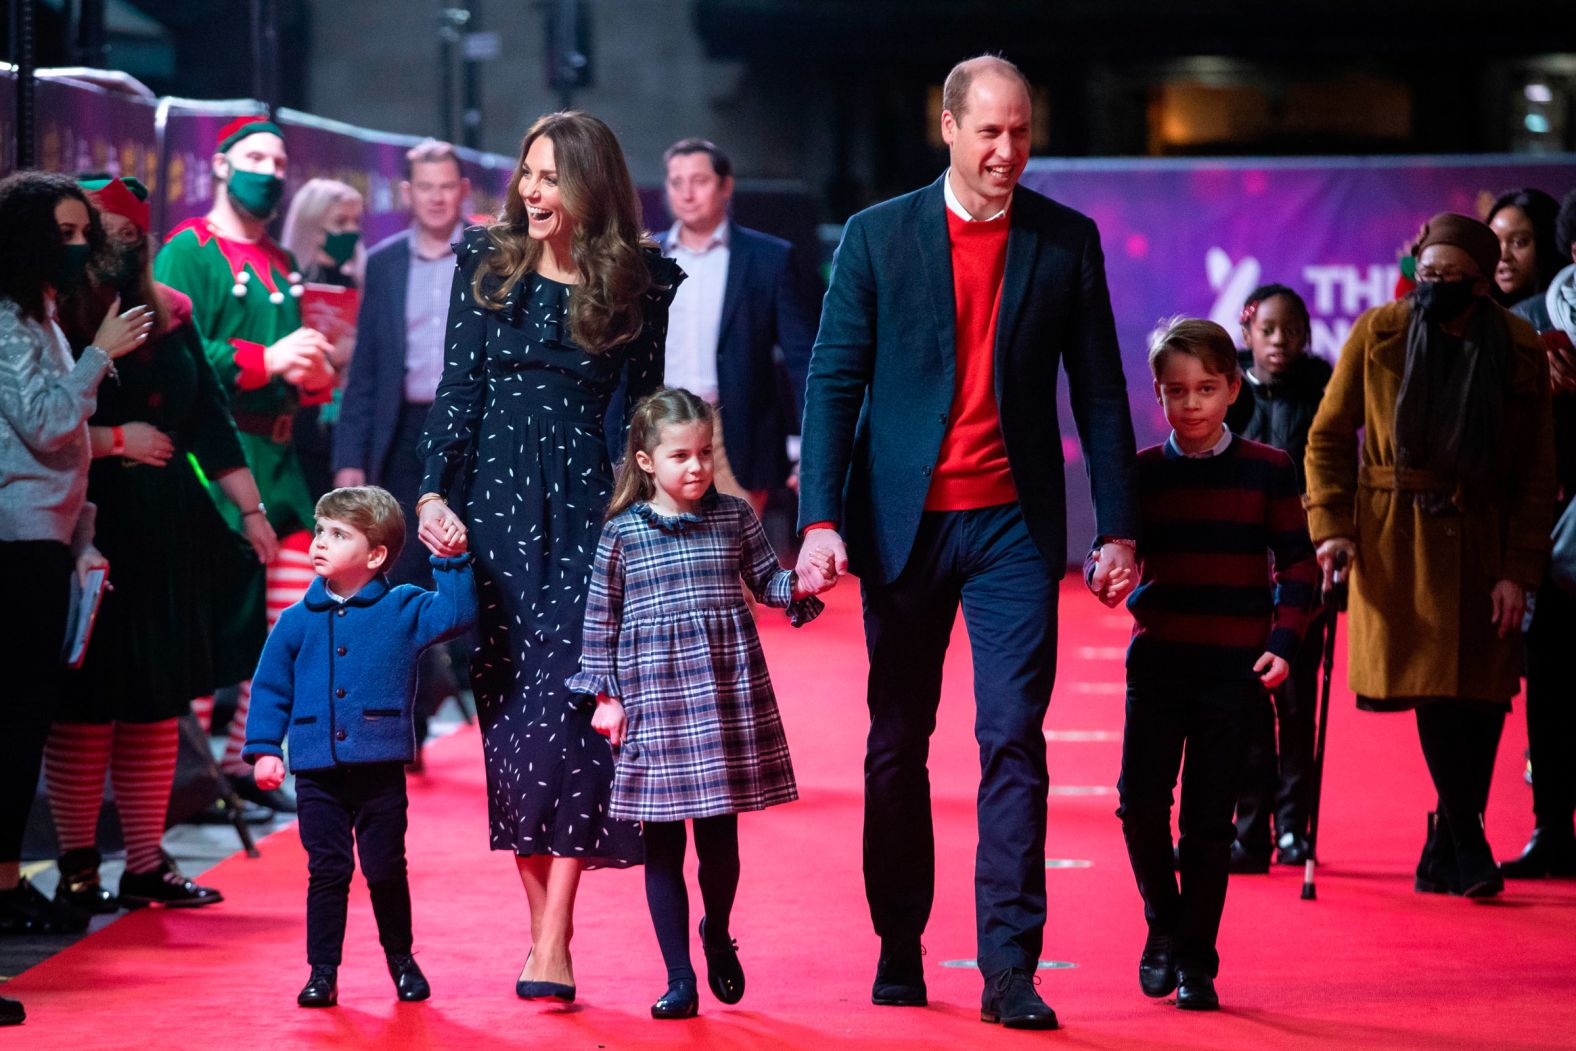 William, Catherine and their children arrive for a pantomime performance at the London Palladium Theatre in December 2020. They were there to thank key workers and their families for their efforts throughout the pandemic.